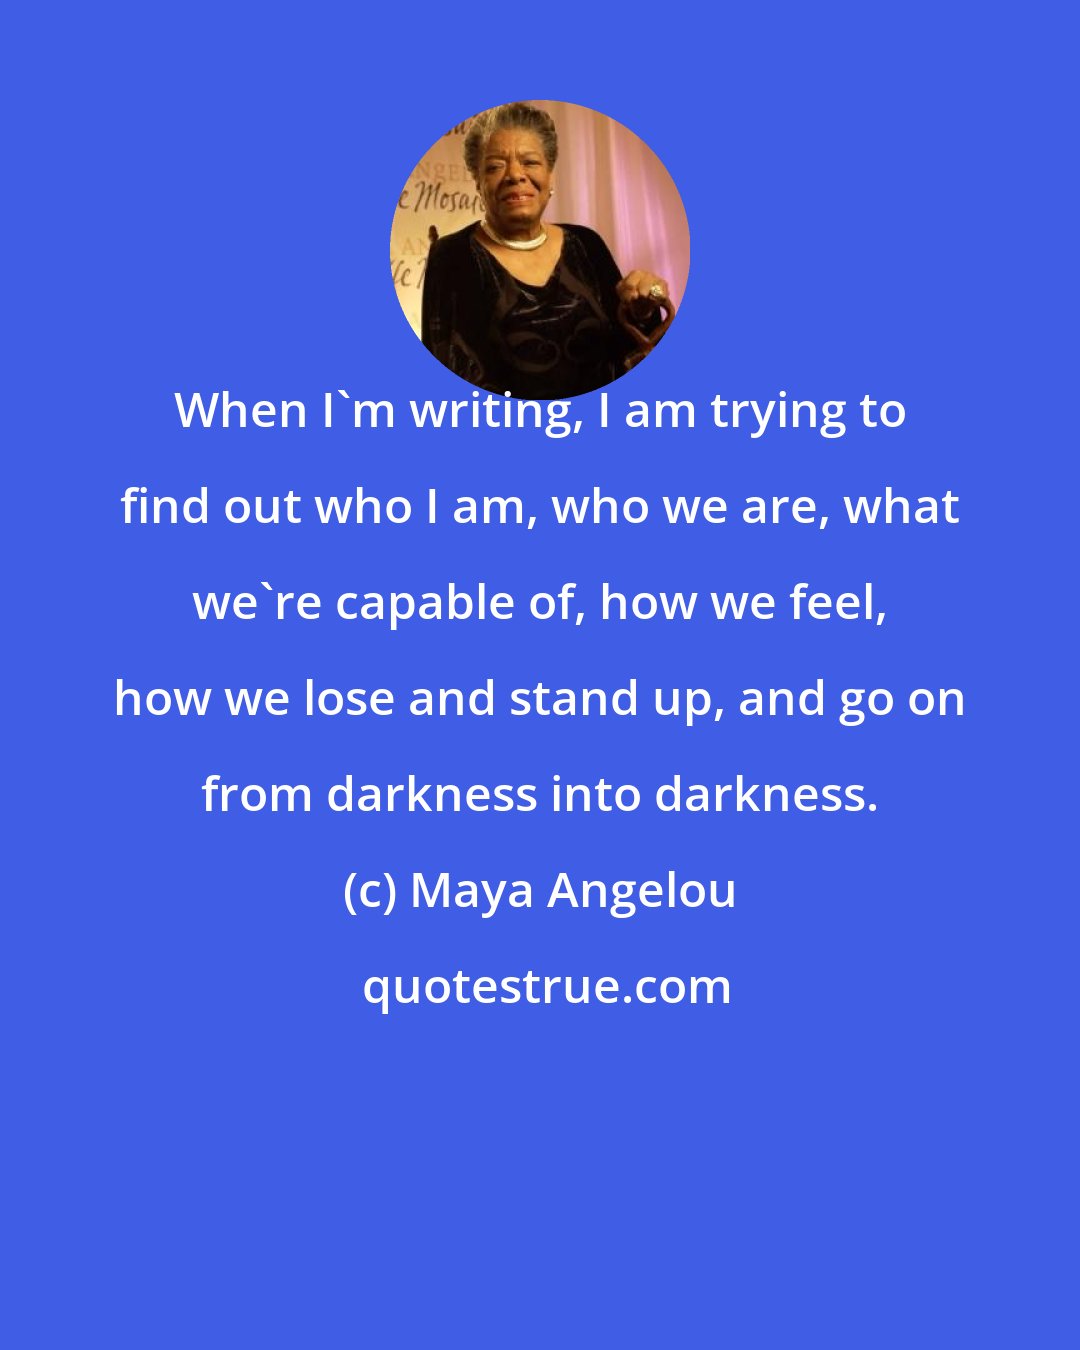 Maya Angelou: When I'm writing, I am trying to find out who I am, who we are, what we're capable of, how we feel, how we lose and stand up, and go on from darkness into darkness.